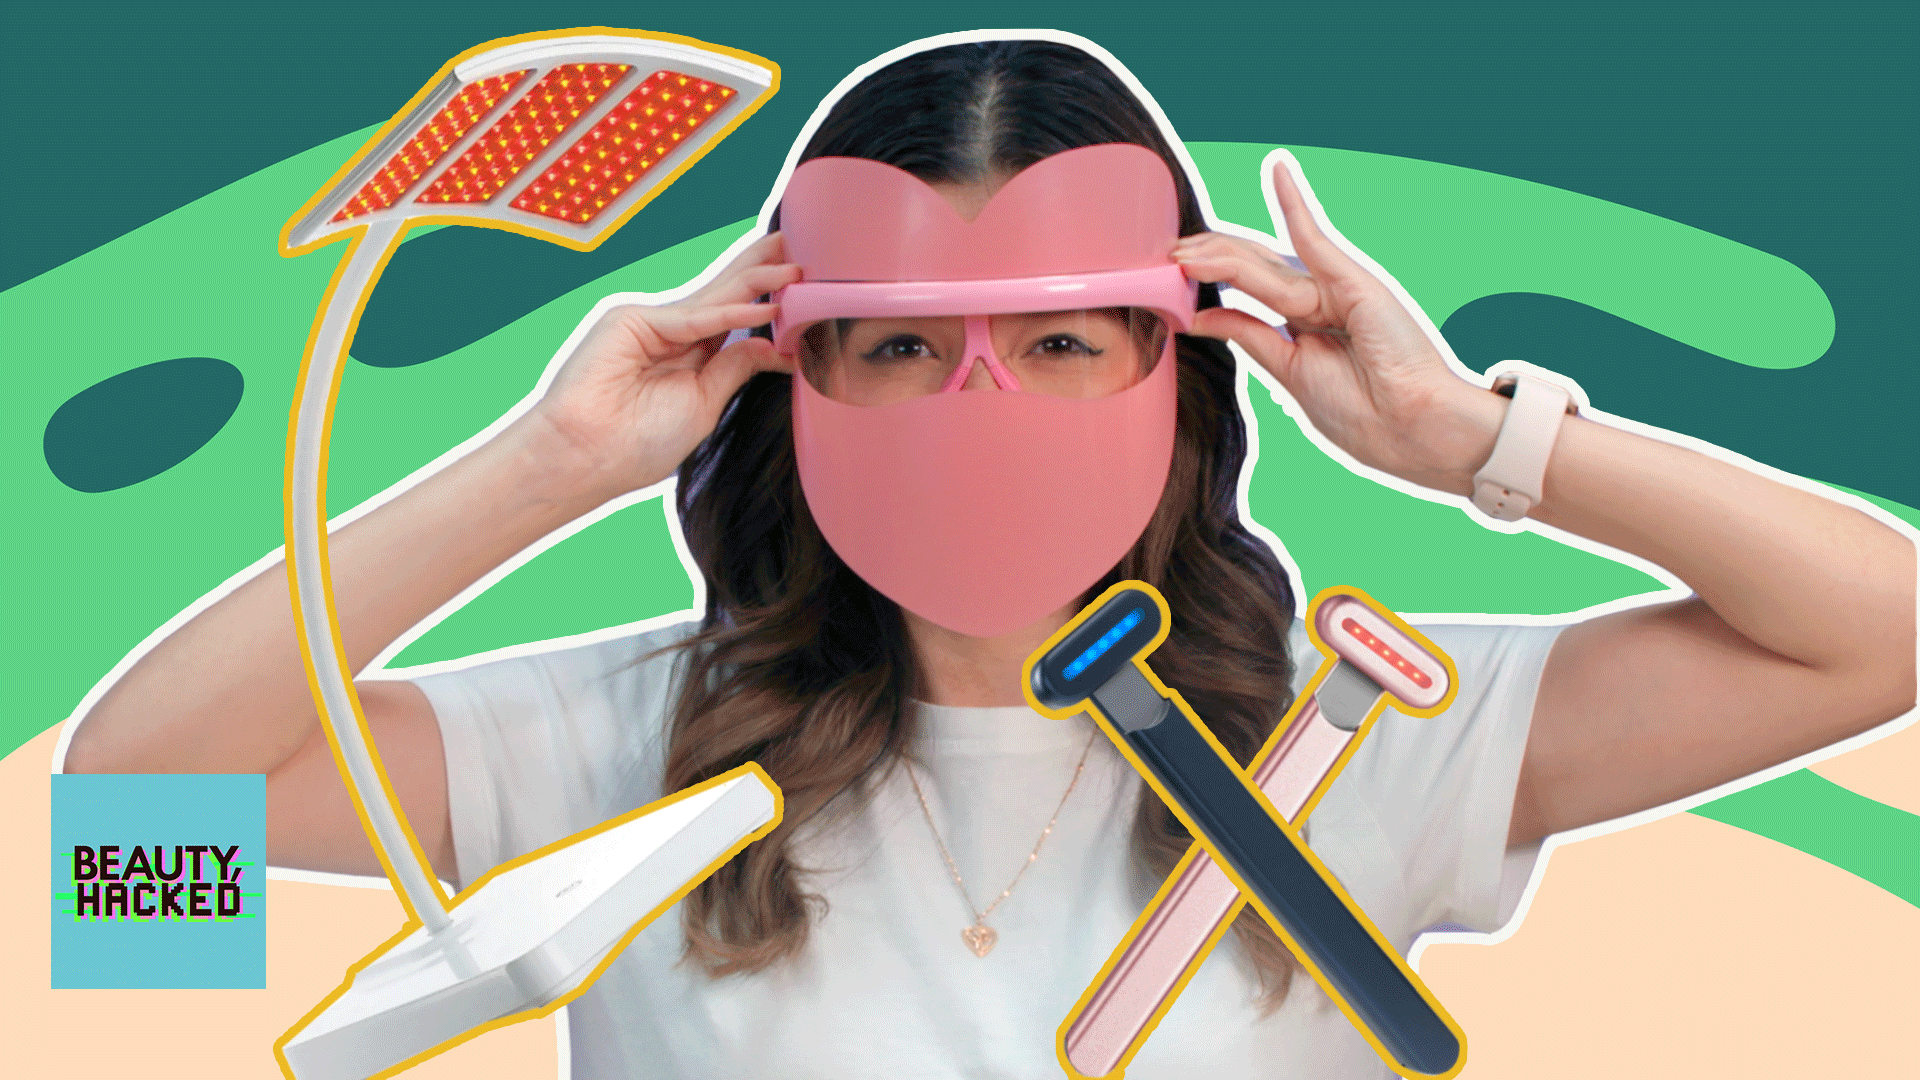 Composite with woman wearing pink plastic face mask with holes showing eye, surrounded by a LED light panel and small facial wands.